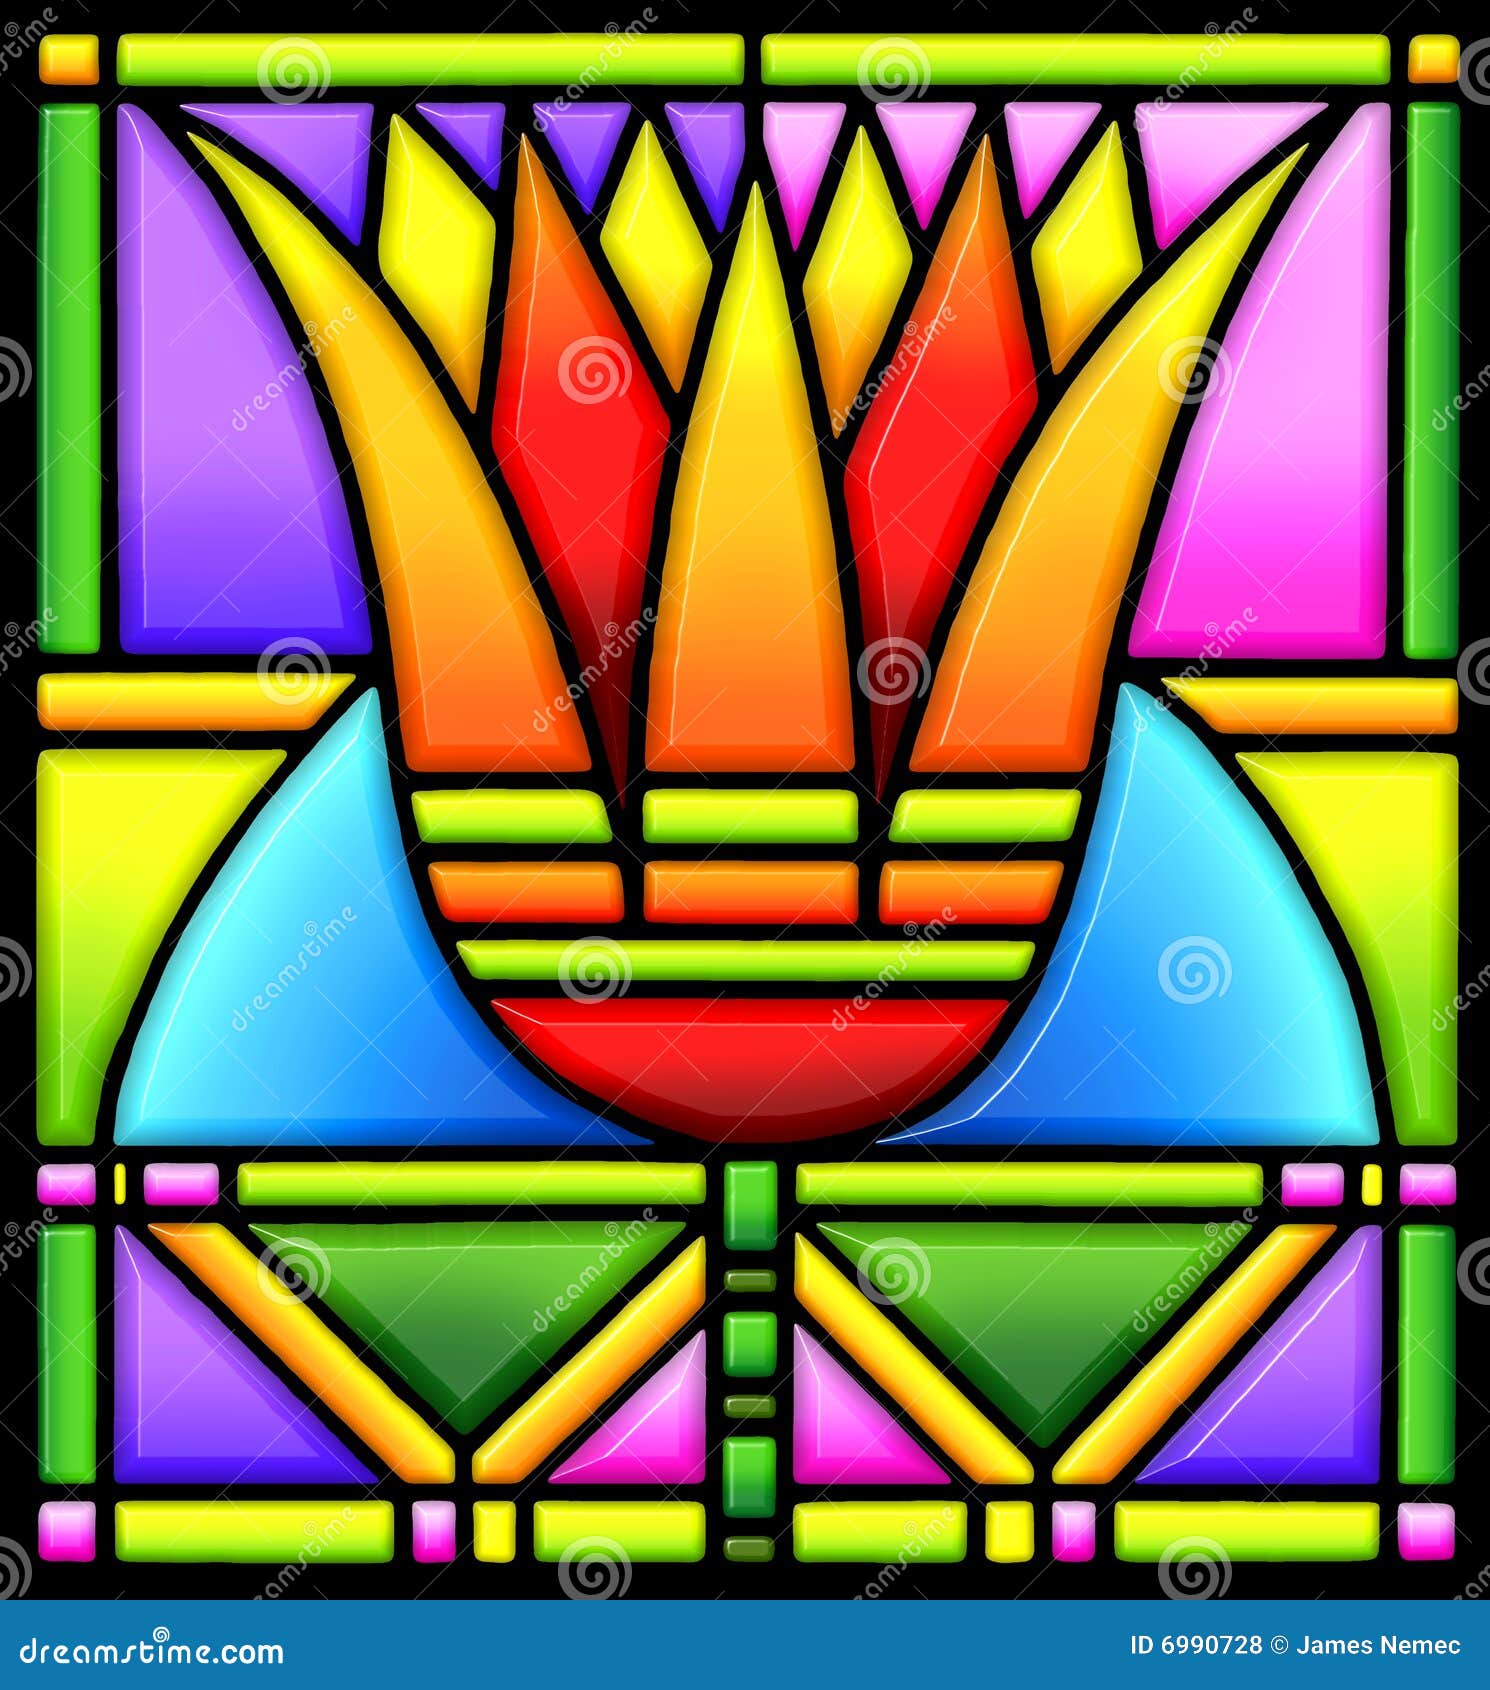 stained glass window clipart free - photo #29